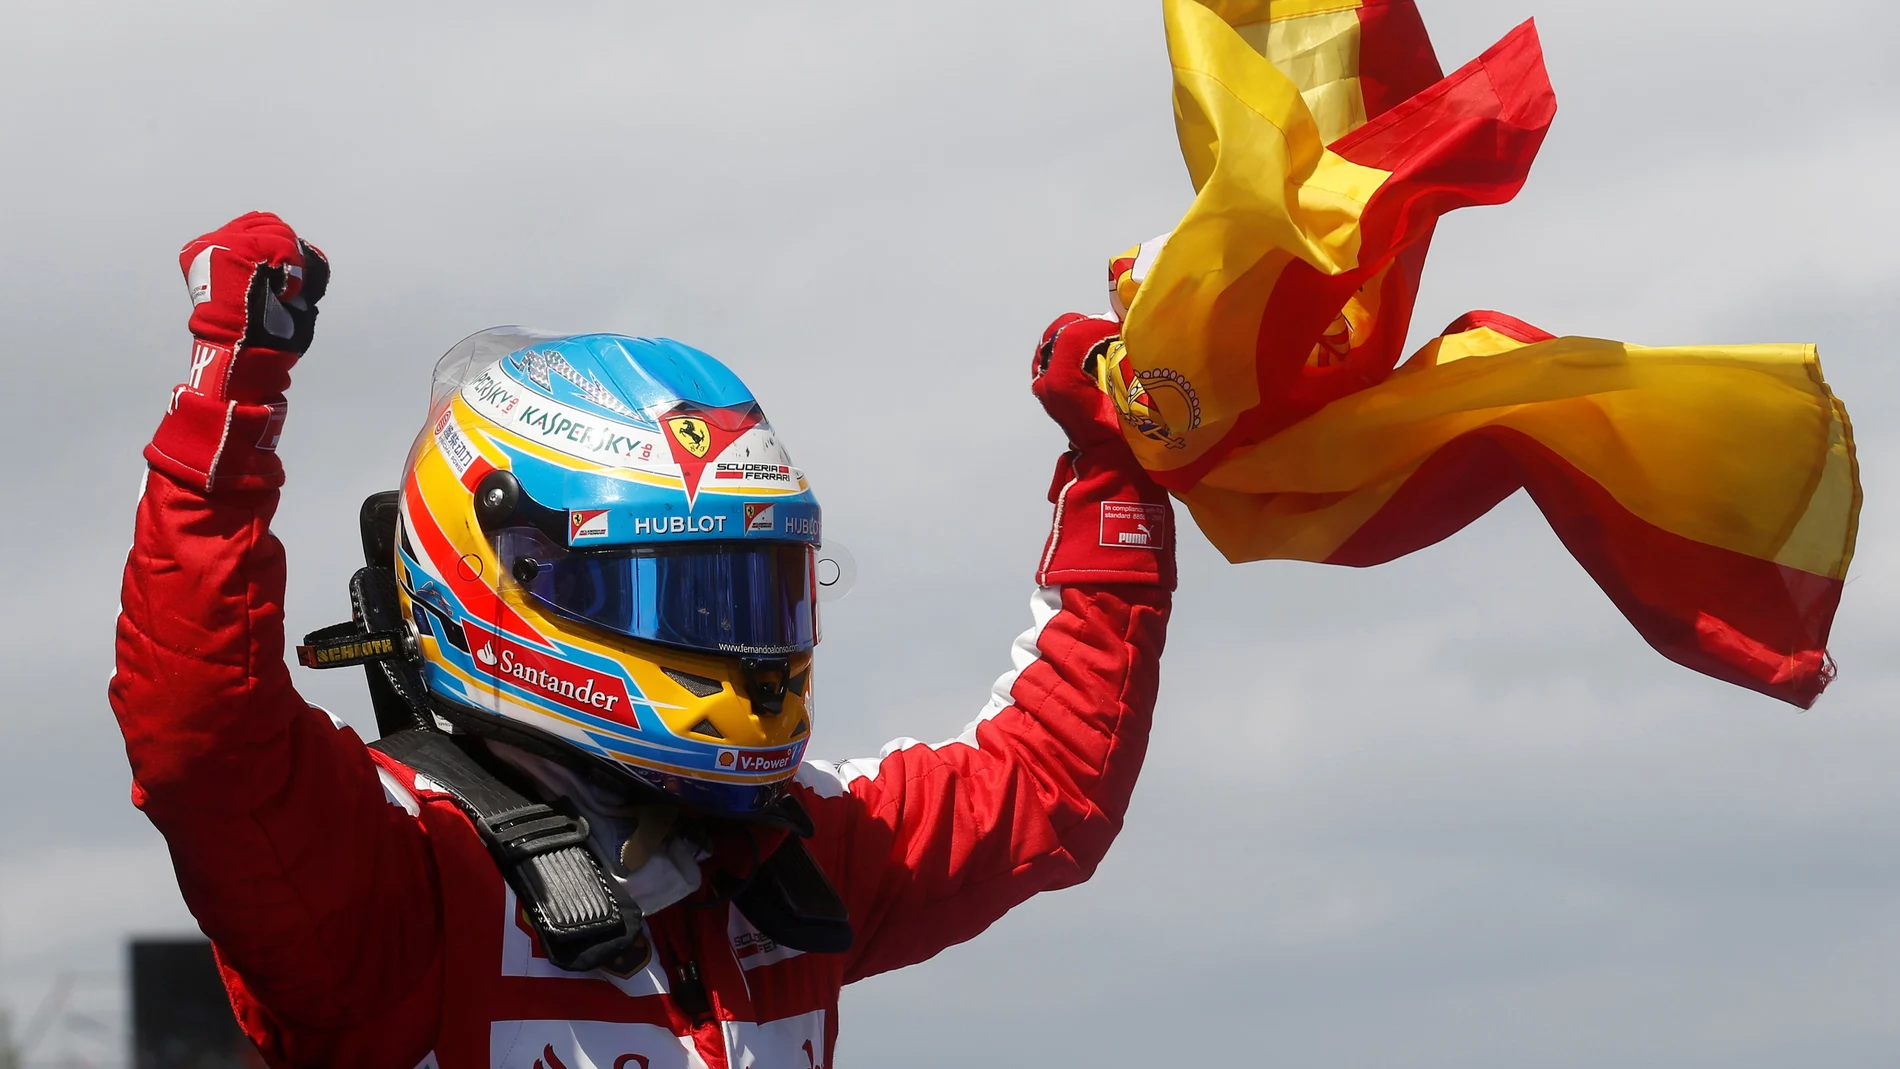 FILE PHOTO: Ferrari driver Fernando Alonso of Spain celebrates holding his national flag after winning the Spanish Grand Prix at the Circuit de Catalunya